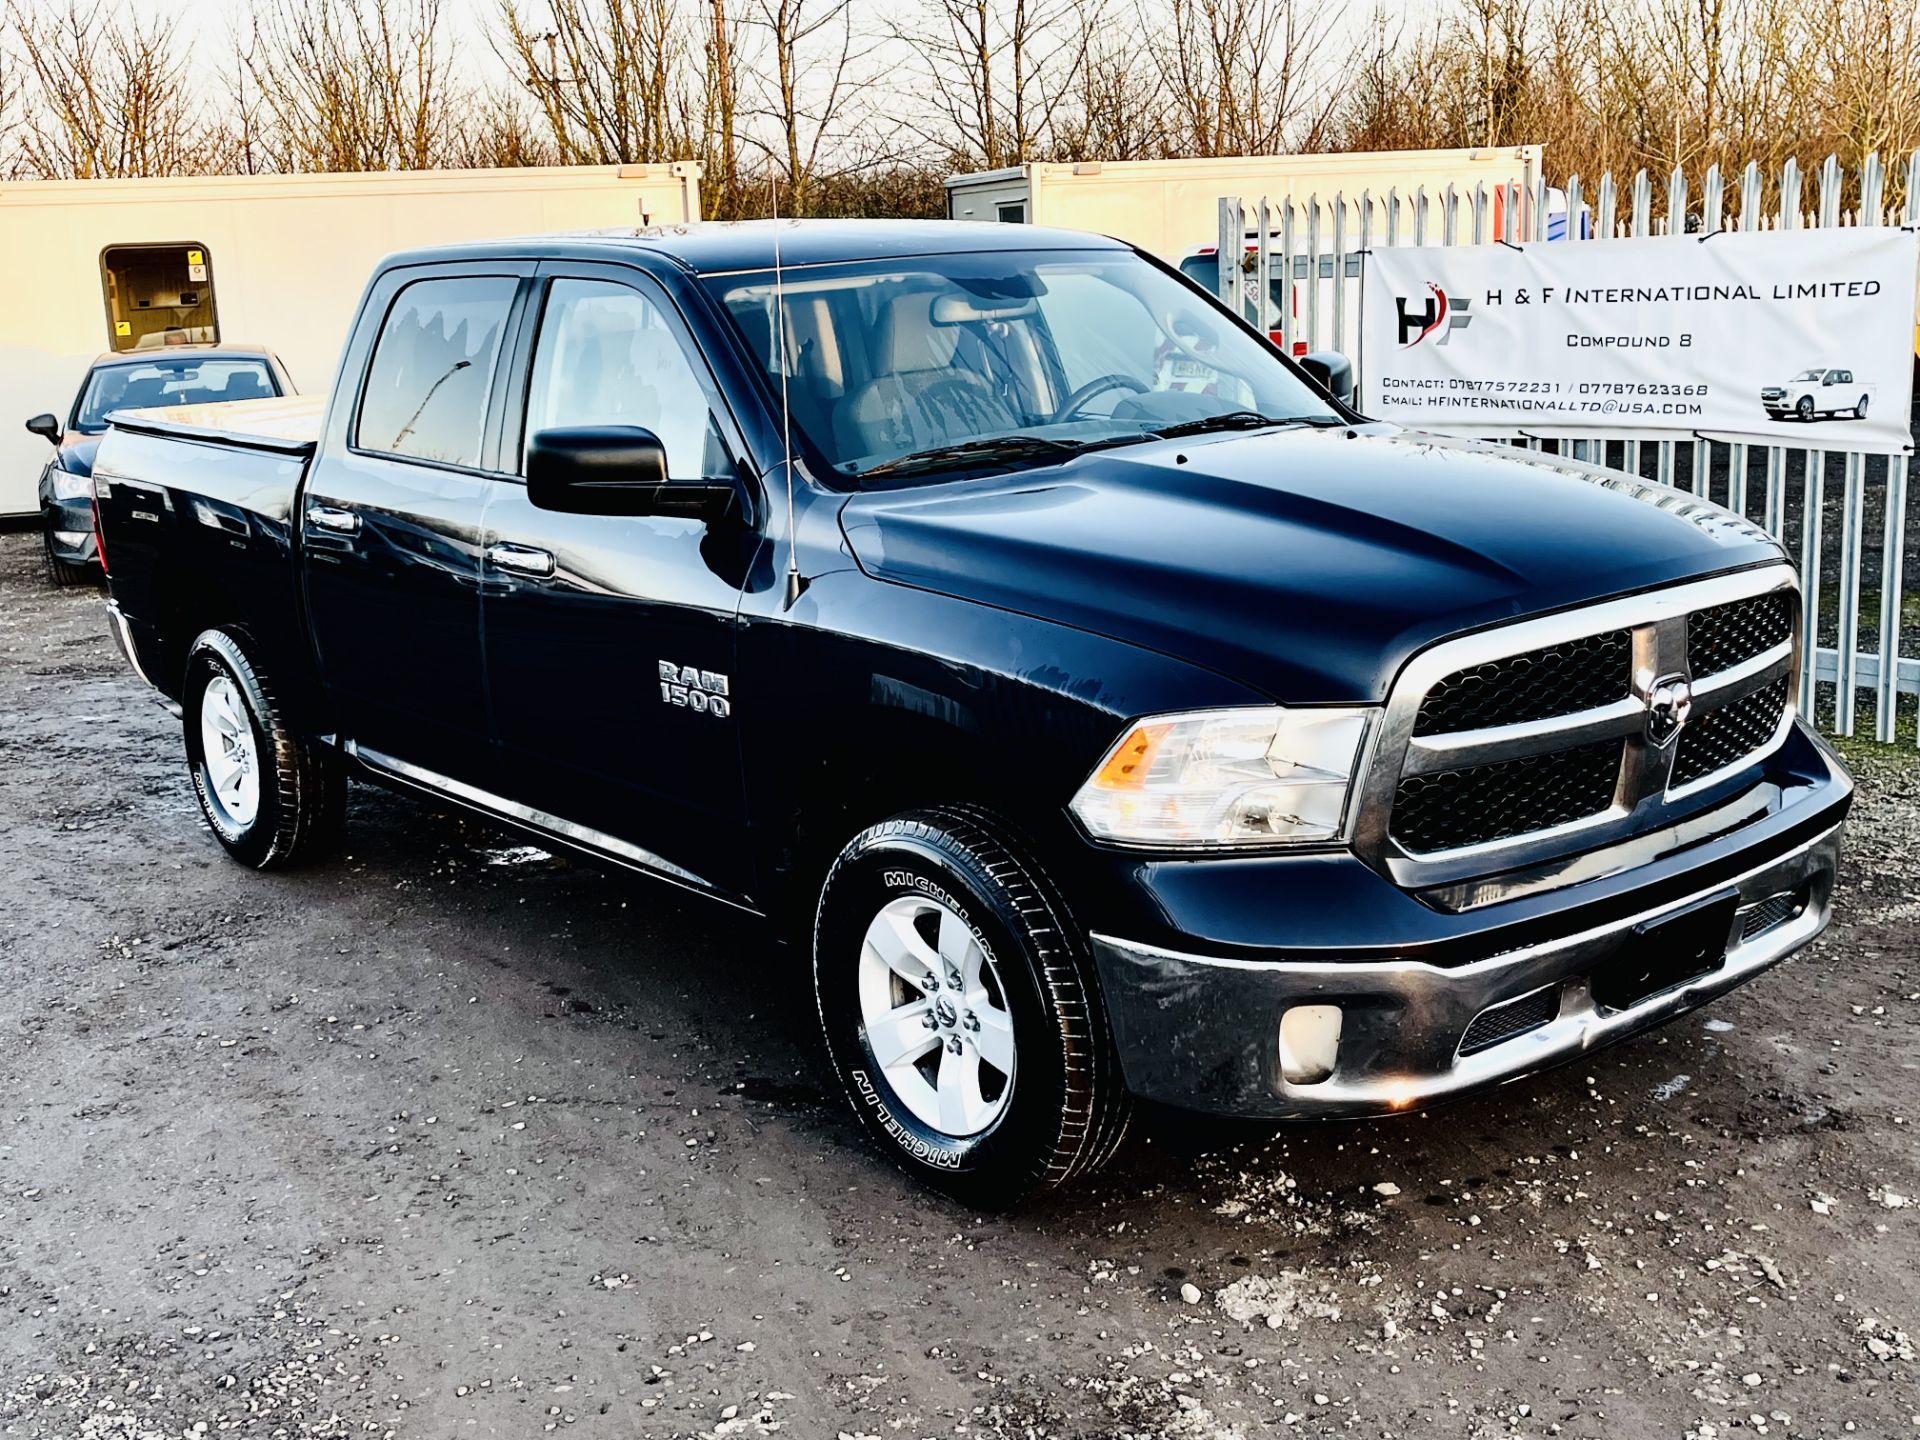 ** ON SALE ** Dodge Ram 3.5L V6 1500 Crew Cab SLT ' 2015 Year ' A/C - 6 Seats - Chrome Package - Image 3 of 31